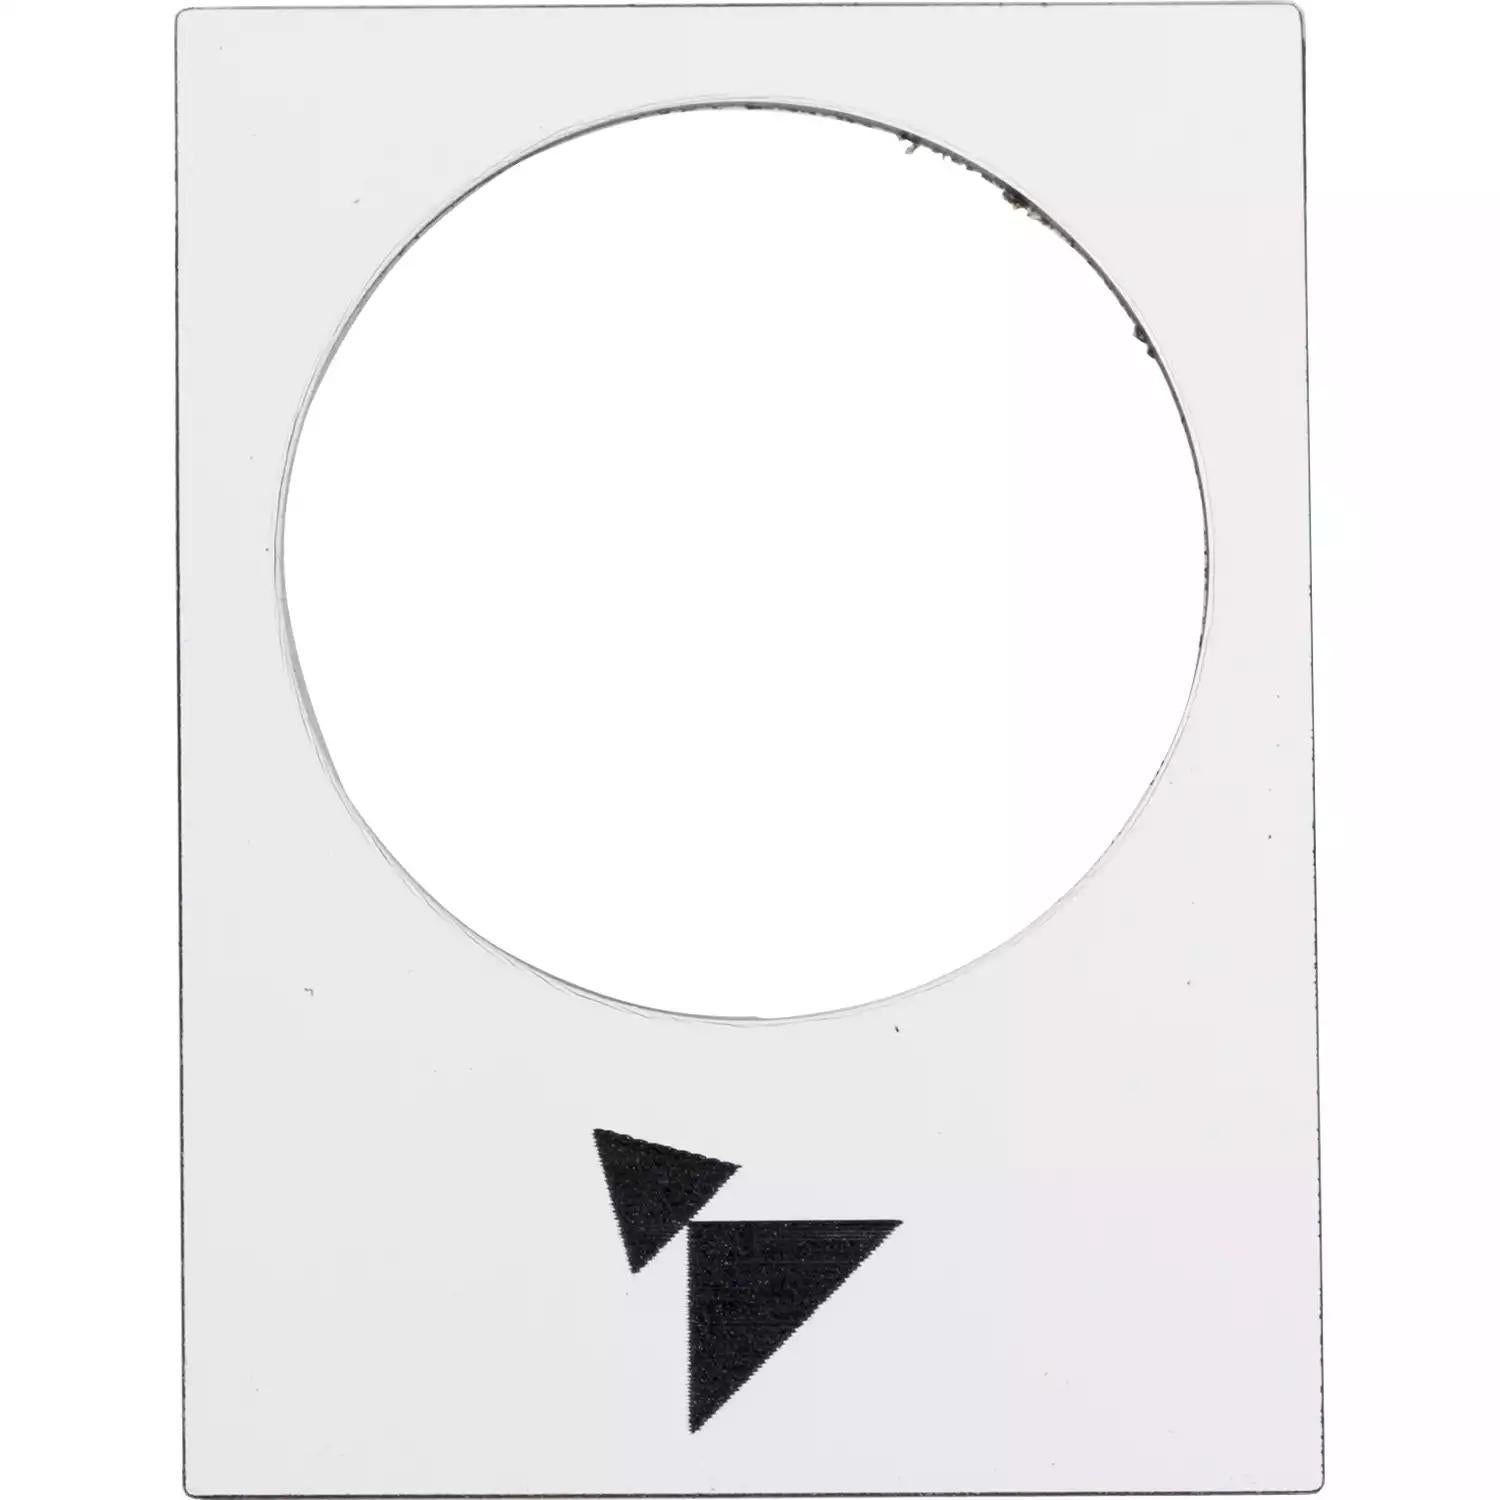 Marked legend, Harmony XAC, nameplate, 30 x 40mm, plastic, white, 22mm push button, black marked up skew double arrowhead